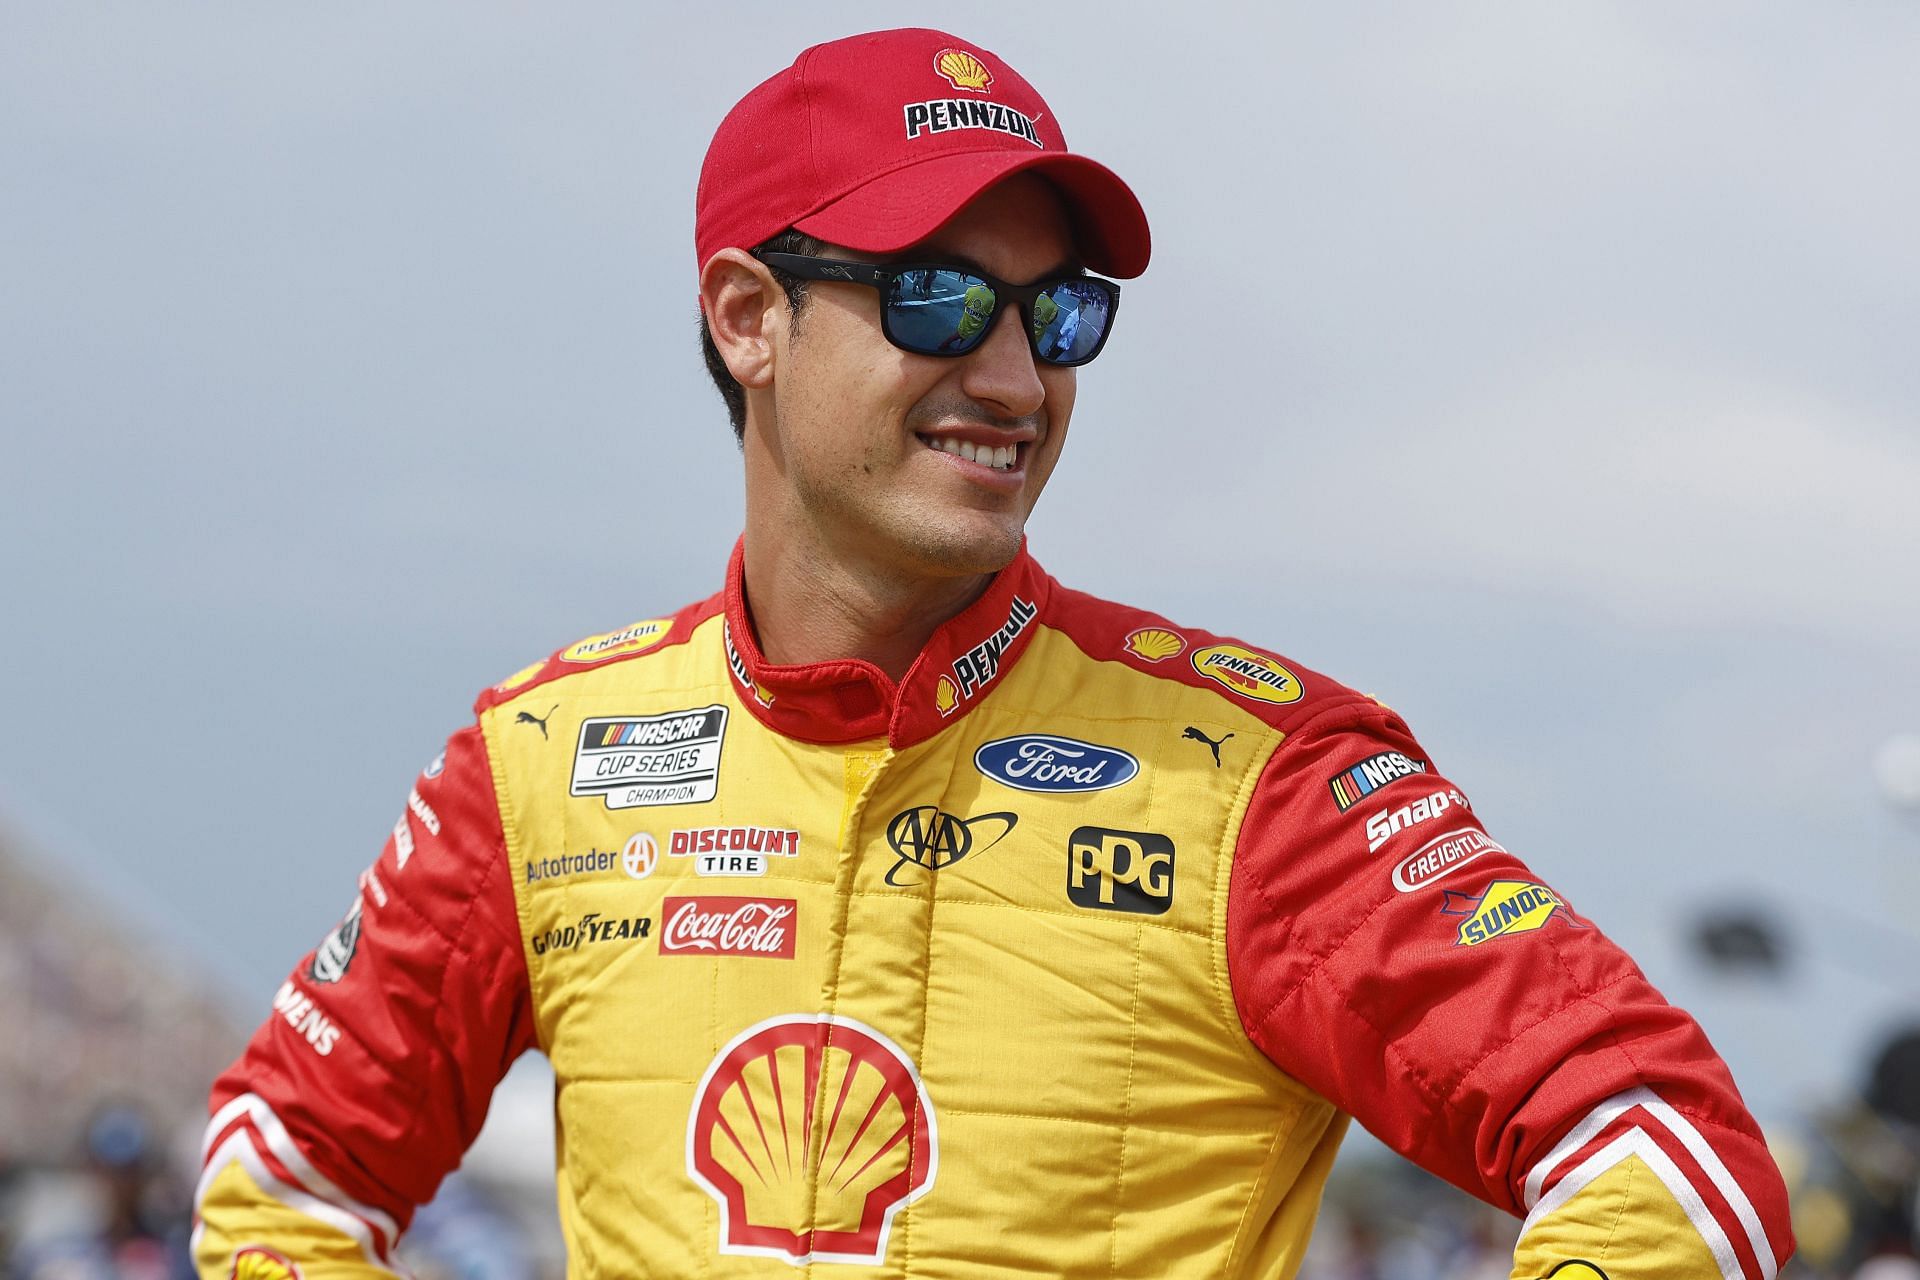 NASCAR 2022 Joey Logano praises his team's strategy after P4 finish at